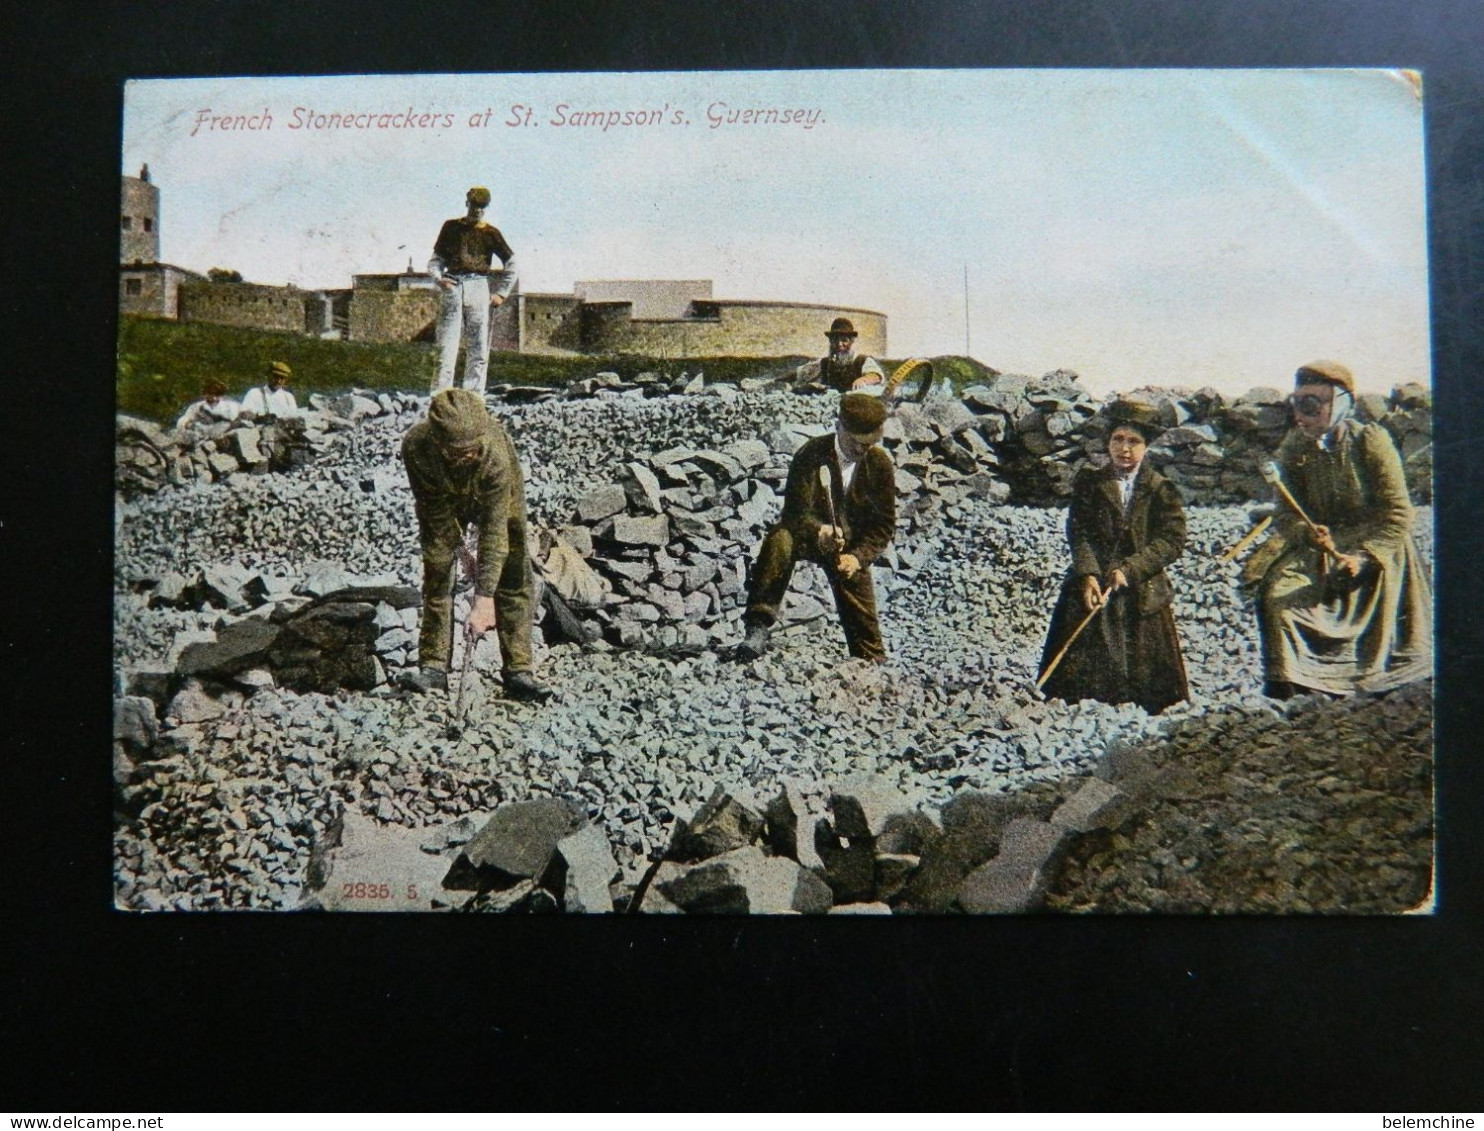 FRENCH STONECRACKERS AT ST SAMPSON'S GUERNSEY - Guernsey